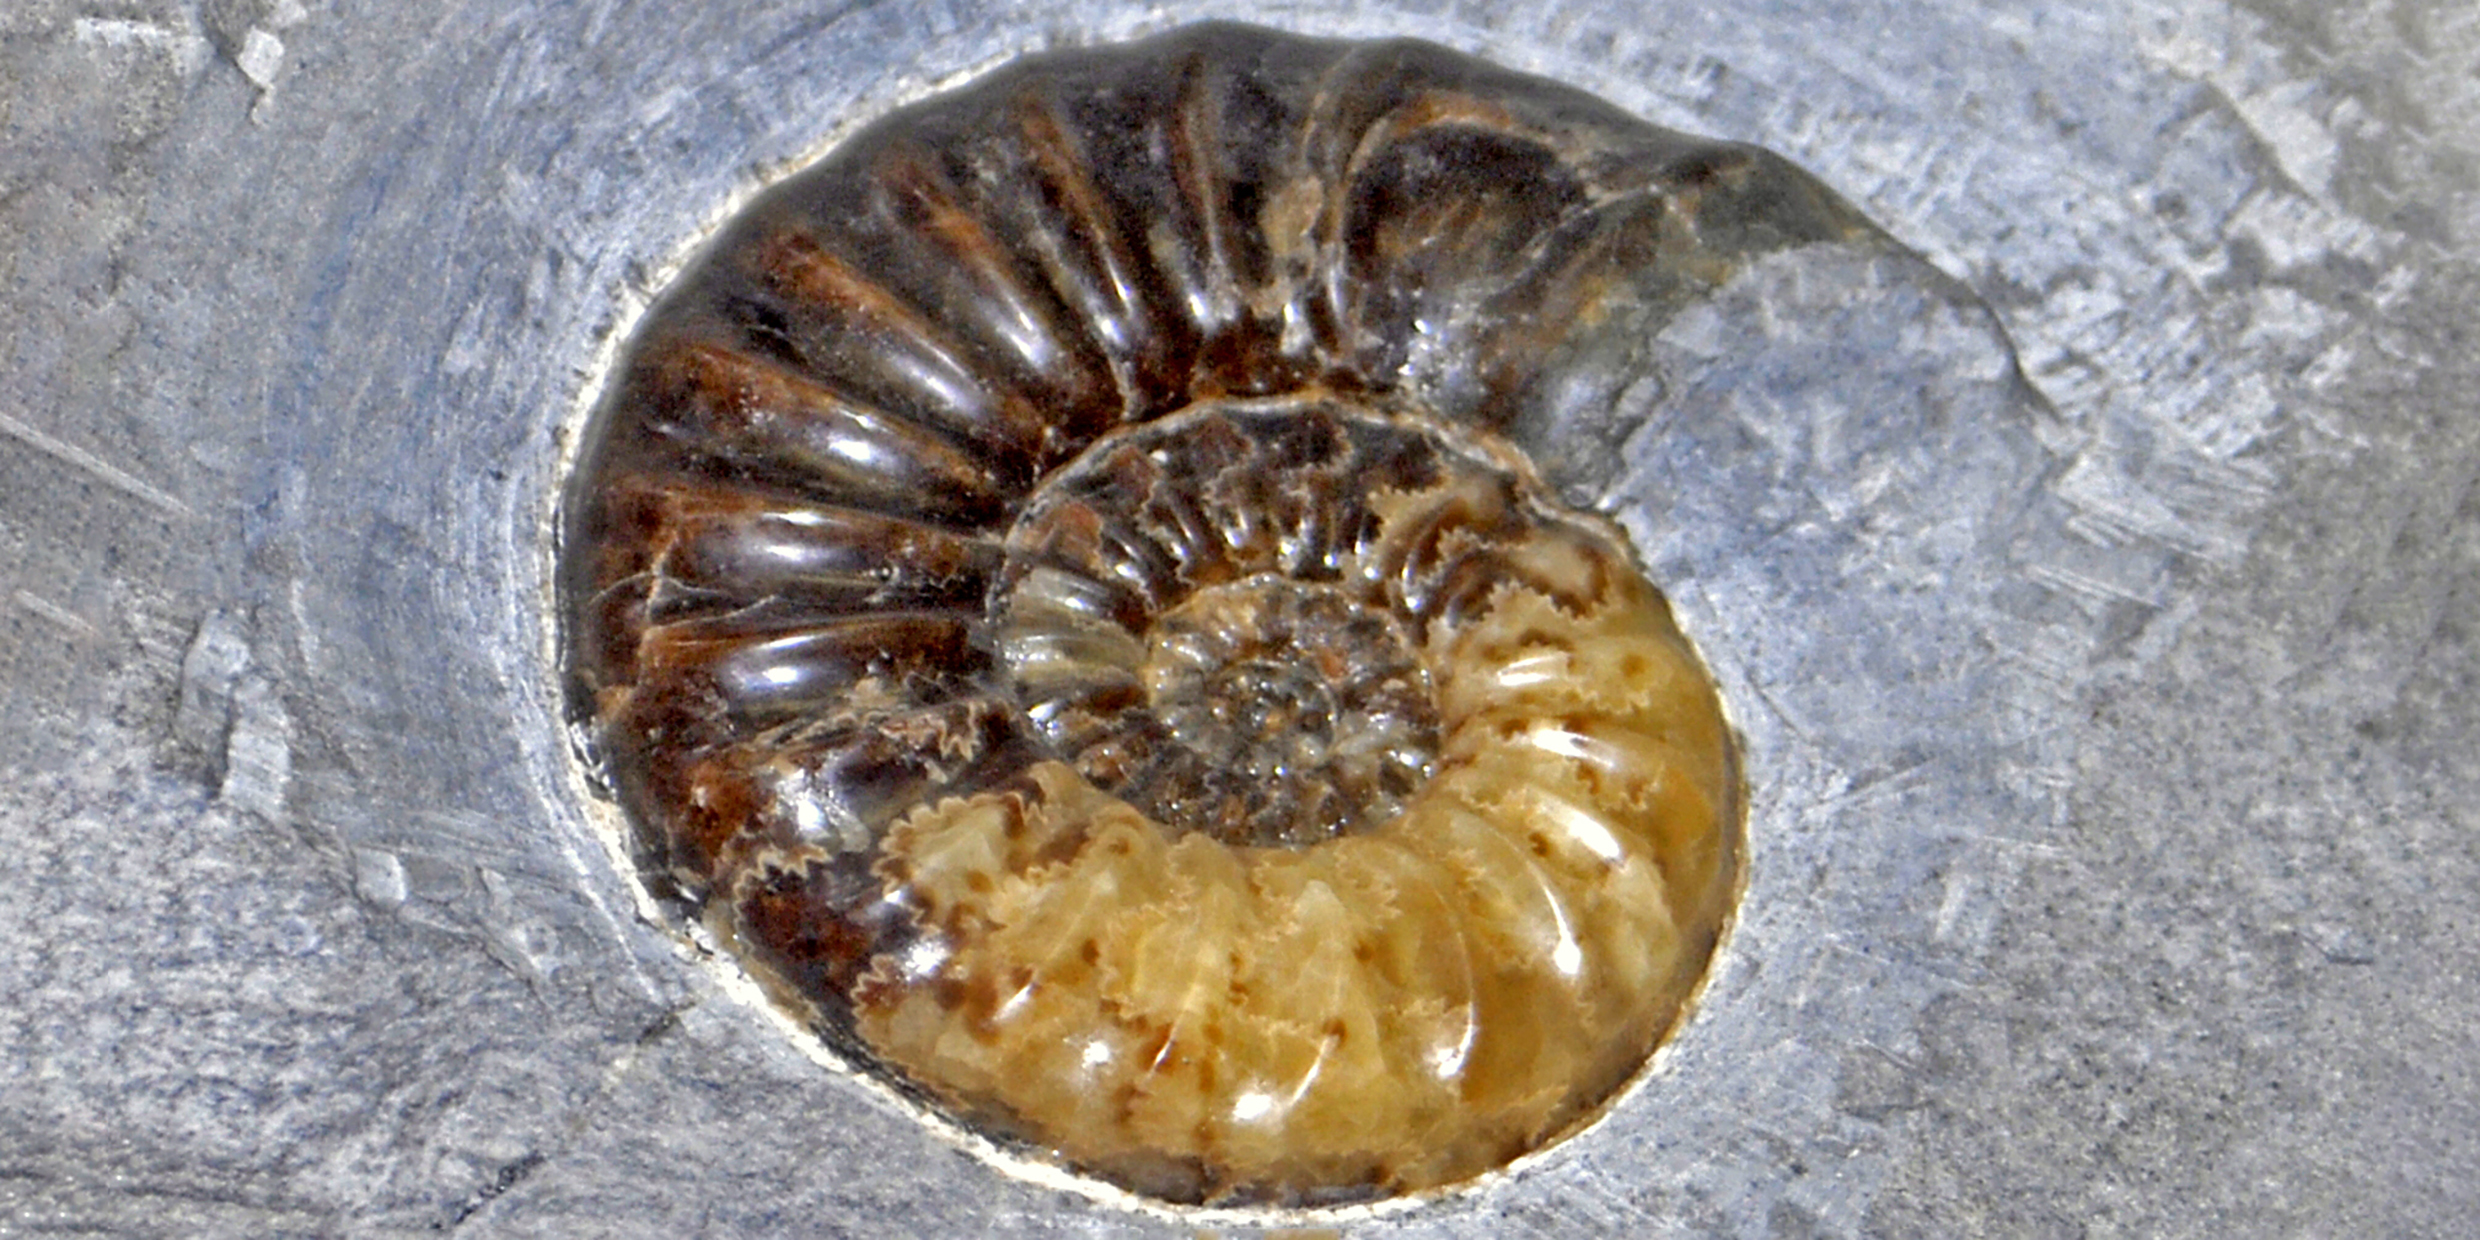 Image of fossil ammonoid encased in stone